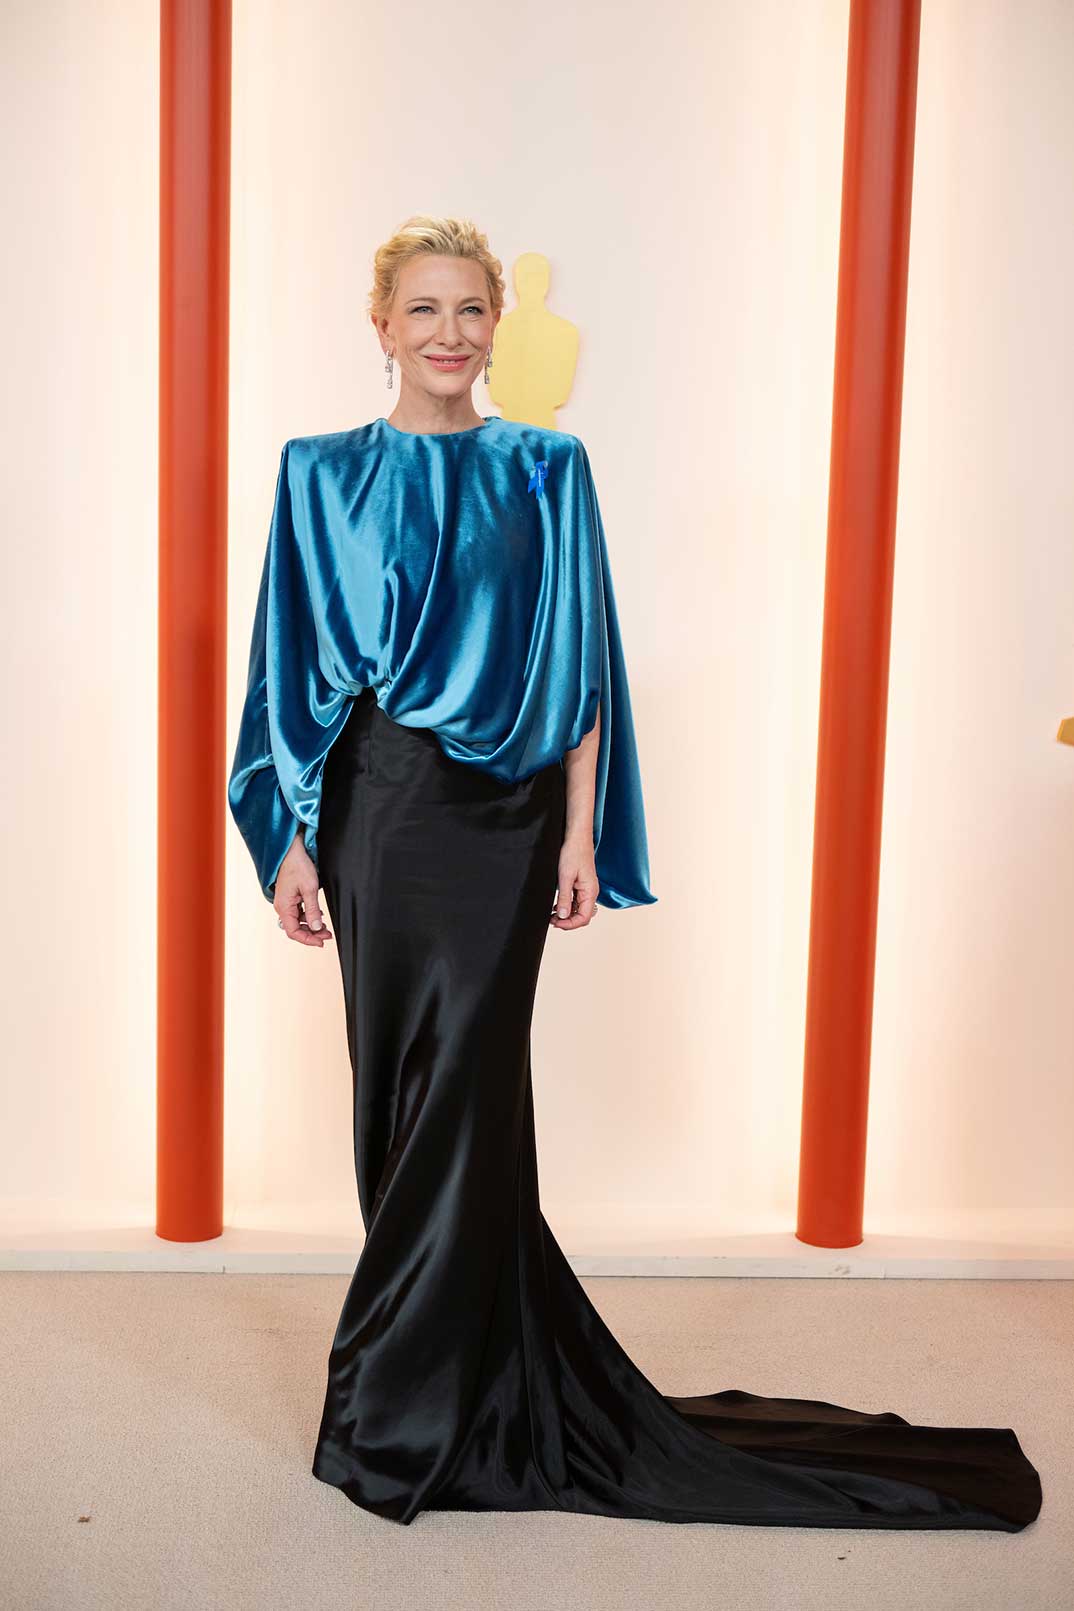 Cate Blanchett - Premios Oscar 2023 © 2023 Academy of Motion Picture Arts and Sciences